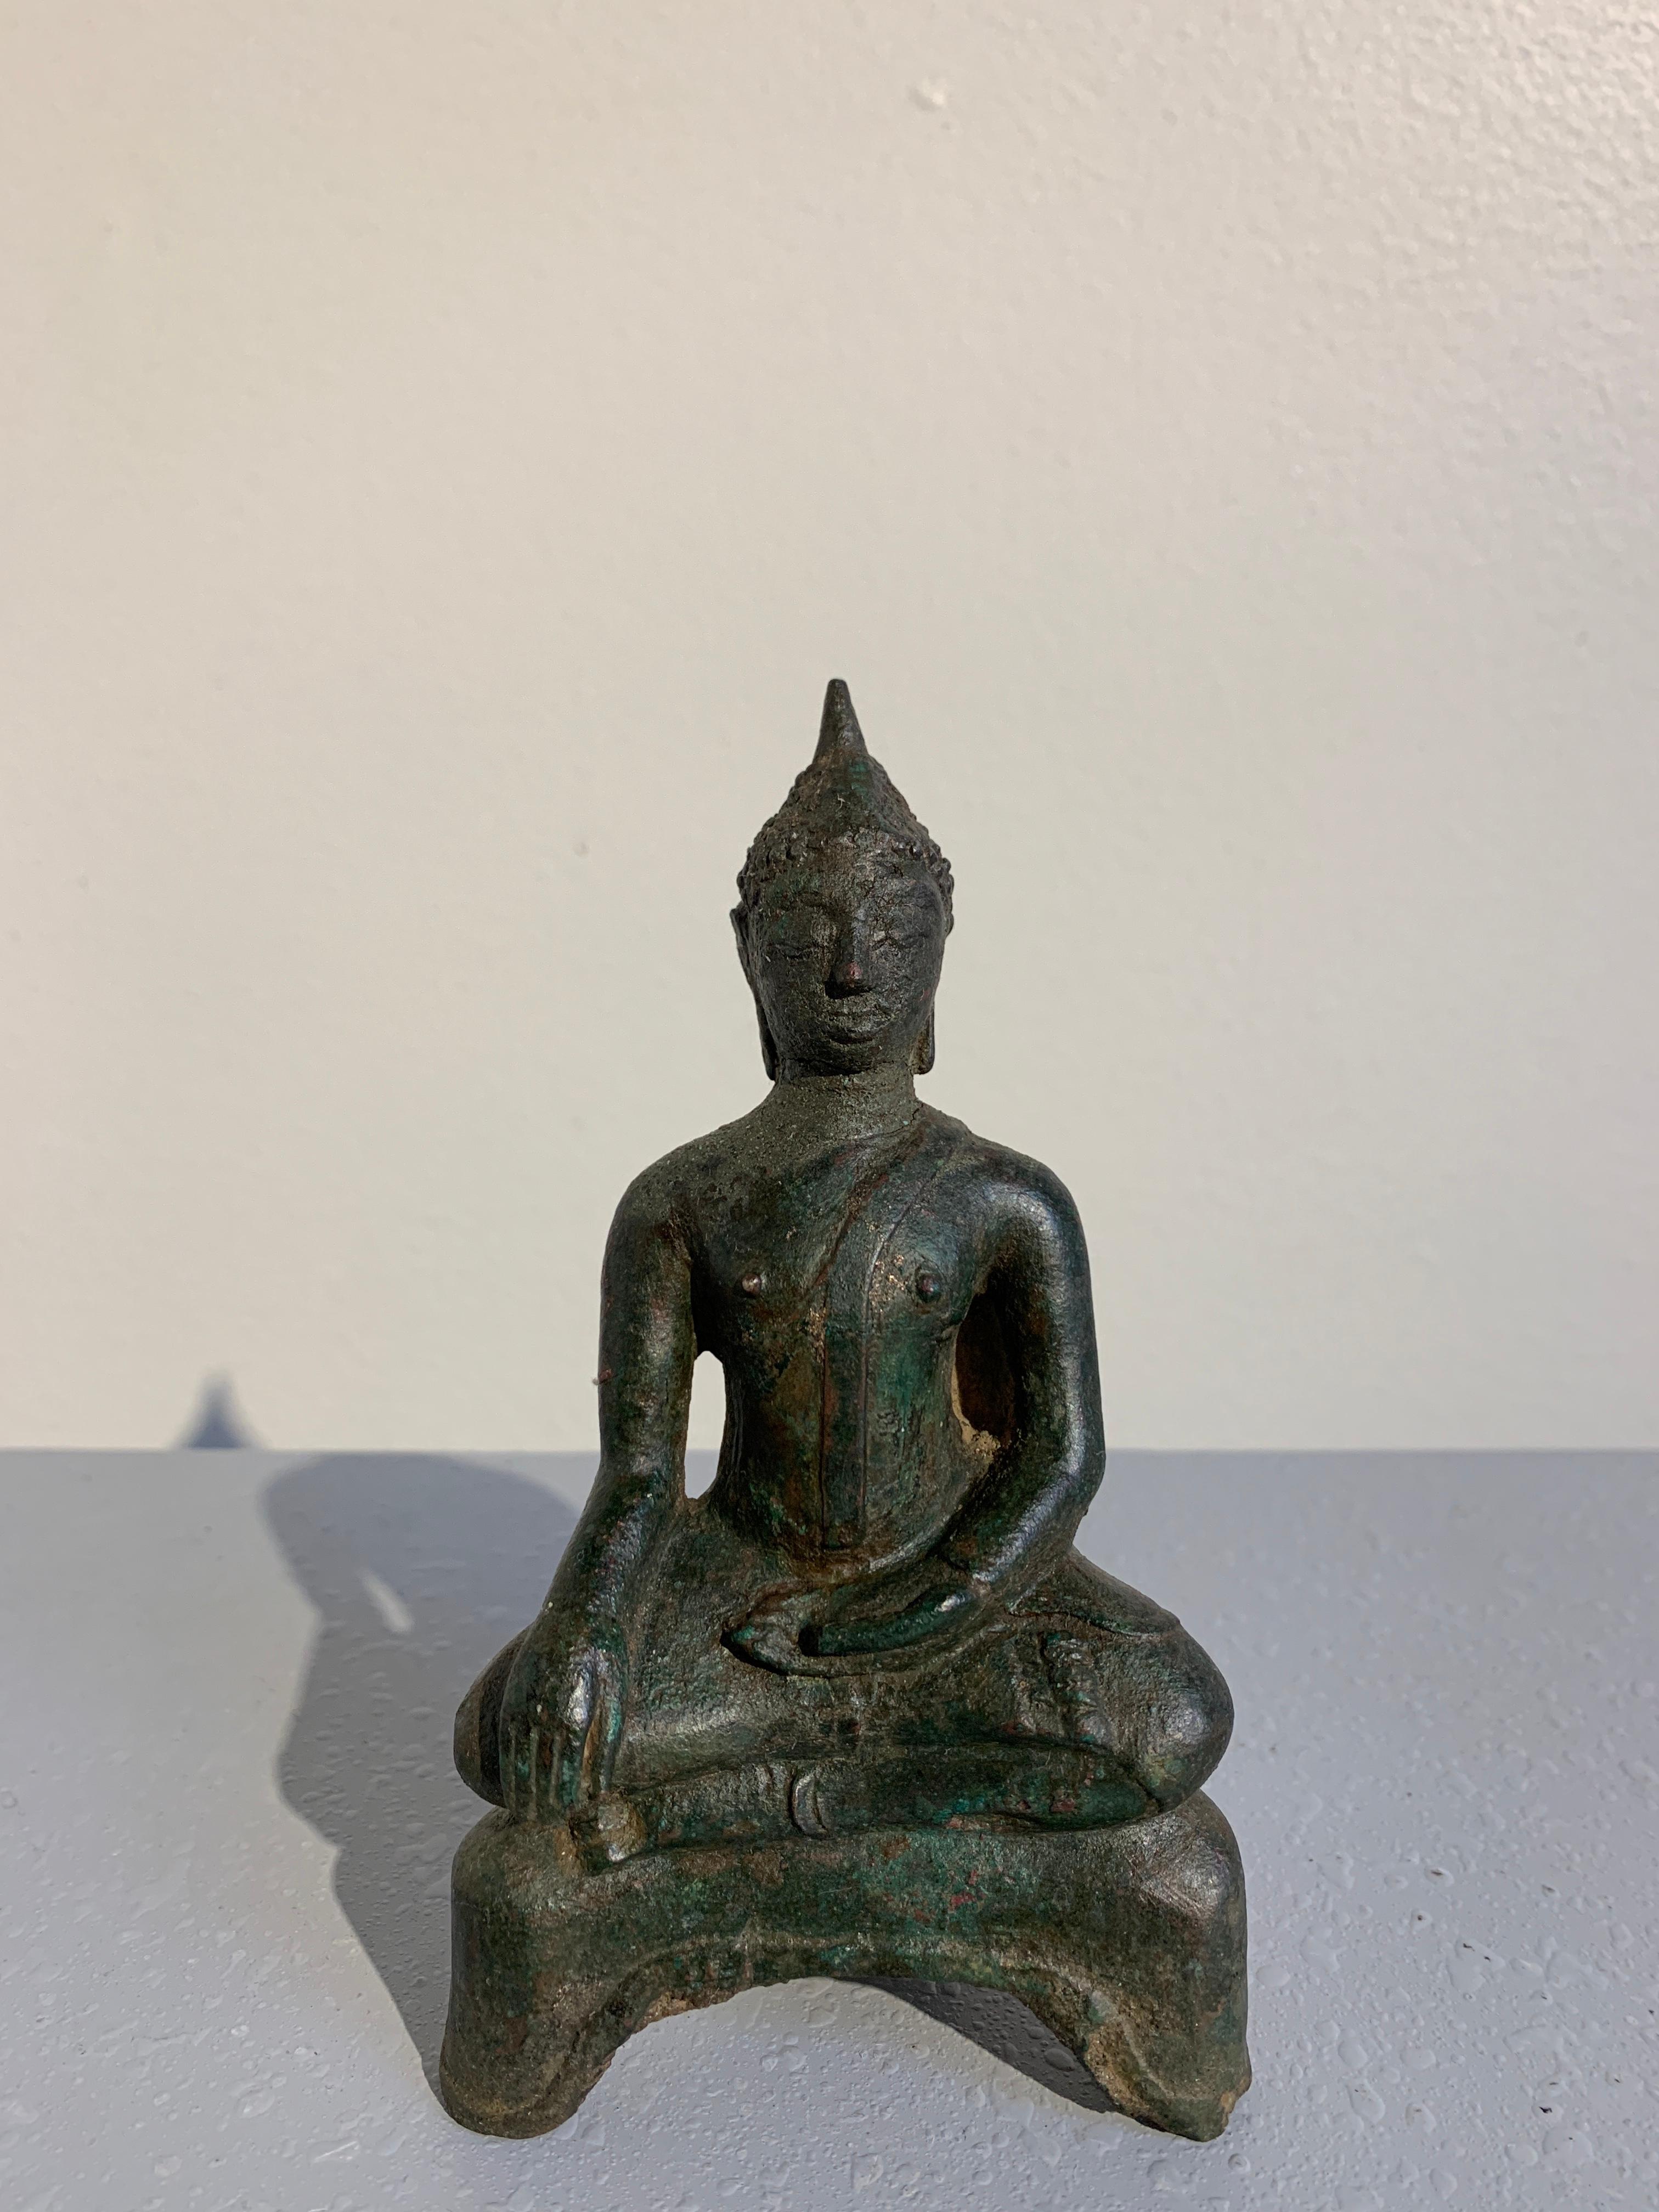 A small Thai cast seated bronze figure of the historical Buddha Shakyamuni, Northern Thailand, Ayutthaya period, 16th century.

This sculpture captures the moment before the man known as Siddartha Guatama reaches enlightenment to become the